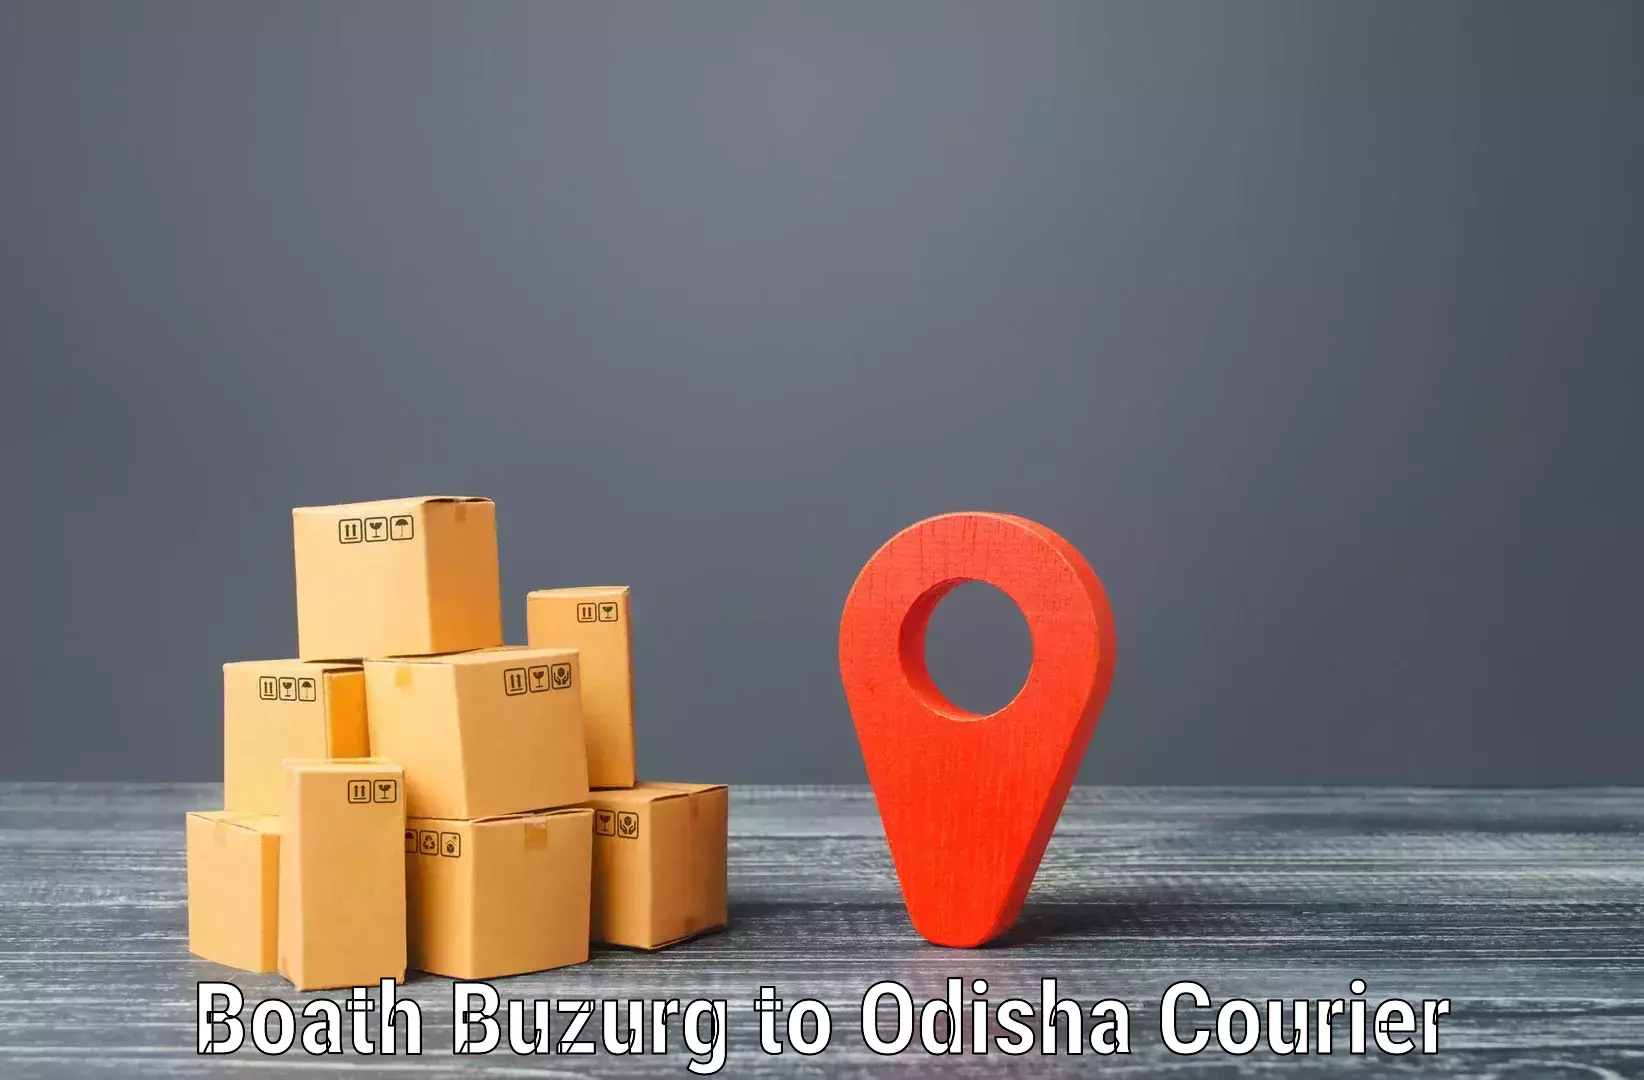 Next-day delivery options Boath Buzurg to Duburi